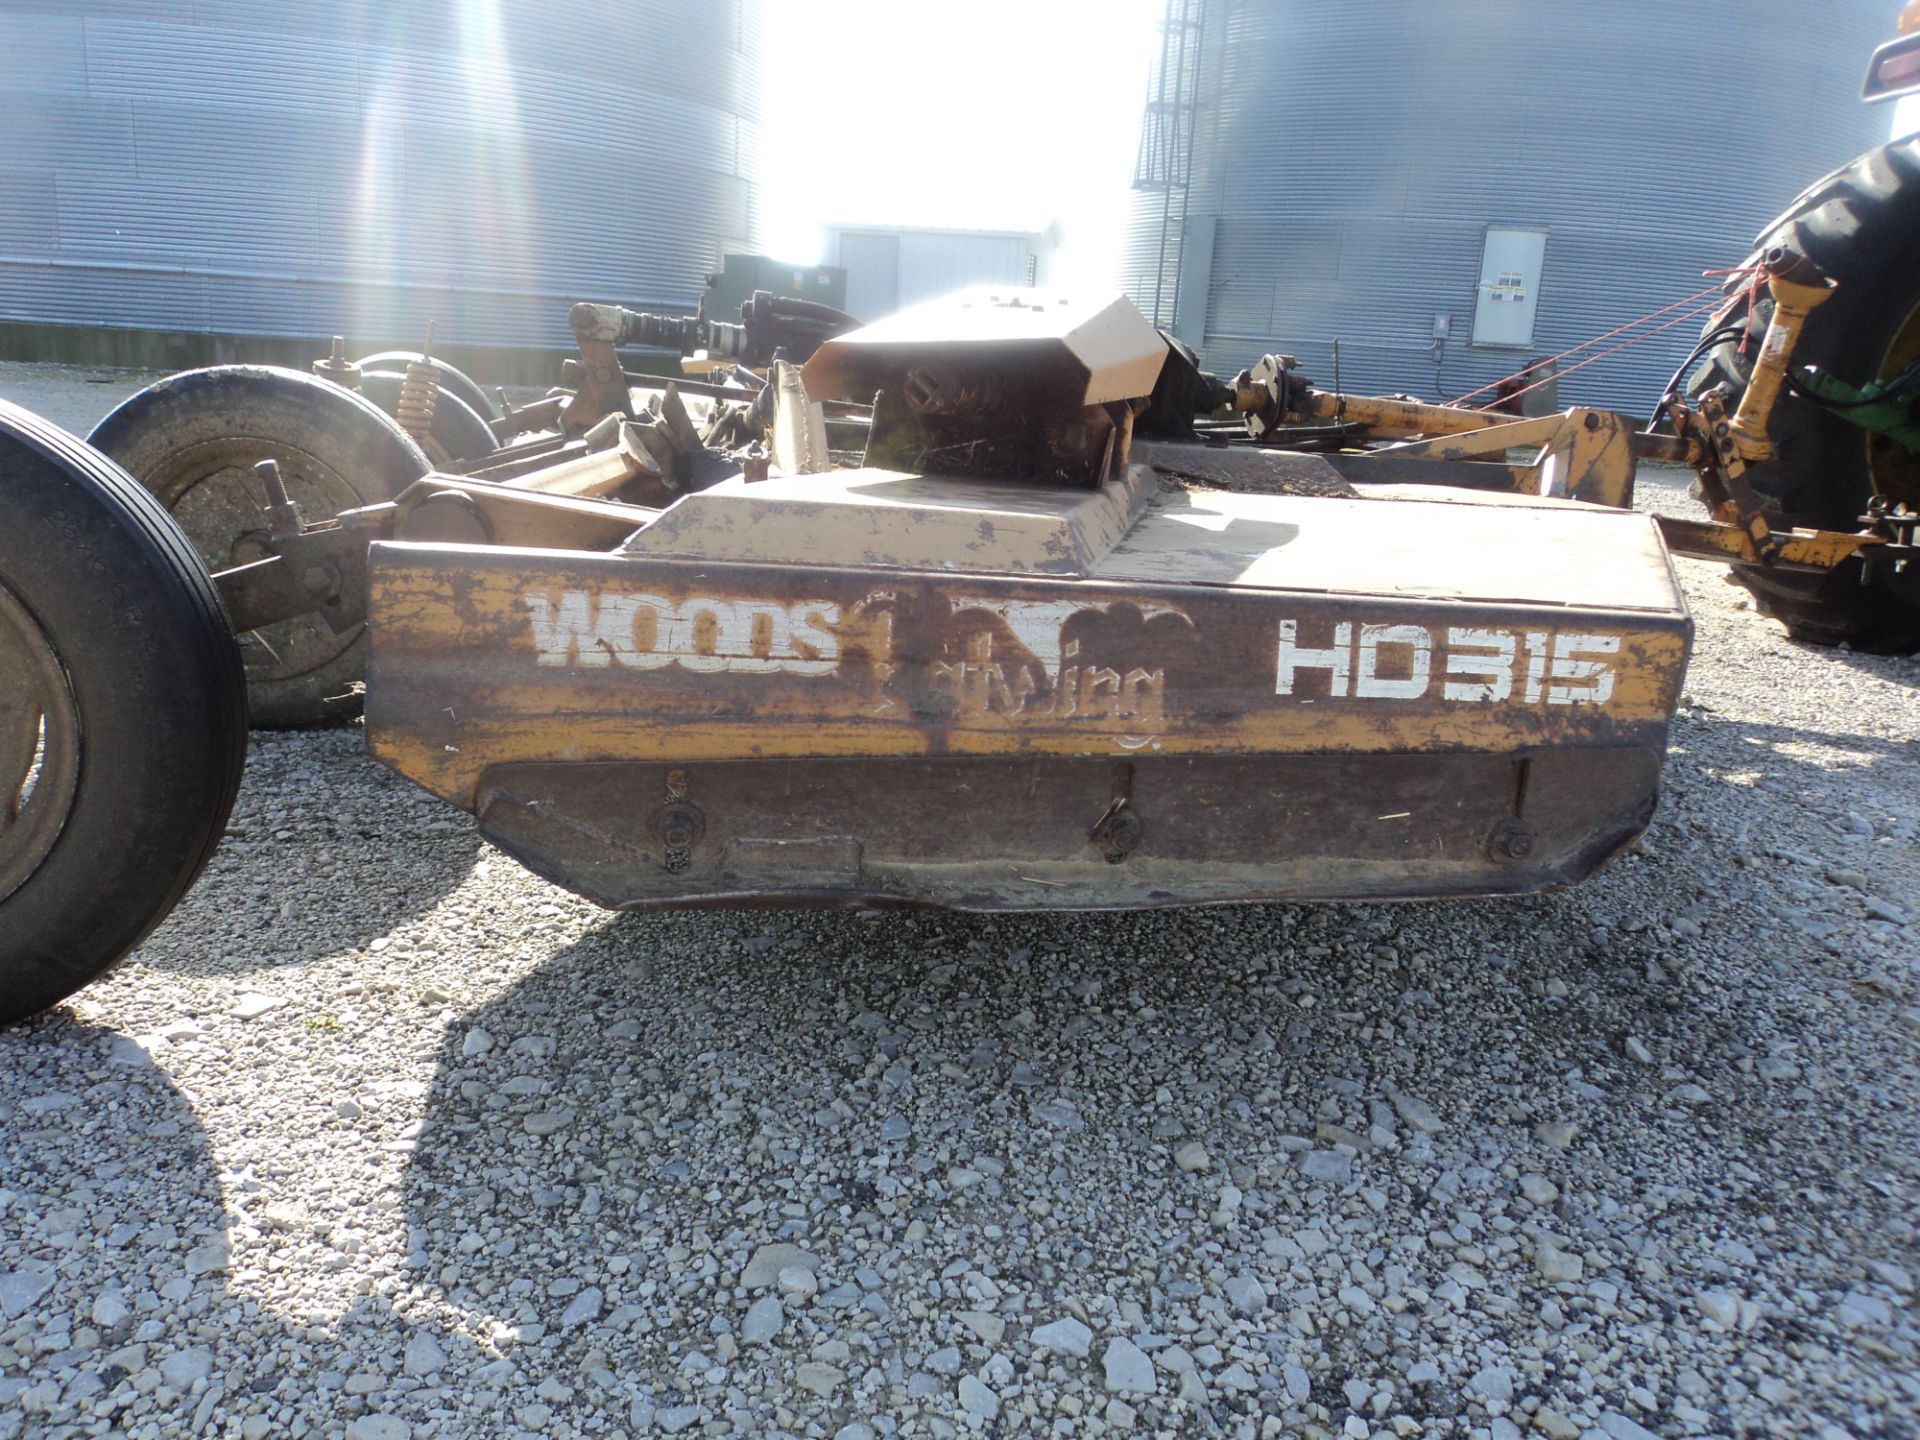 15' Woods HD 315 Batwing rotary mower, hyd fold, hyd lift, aircraft tires - Image 2 of 13